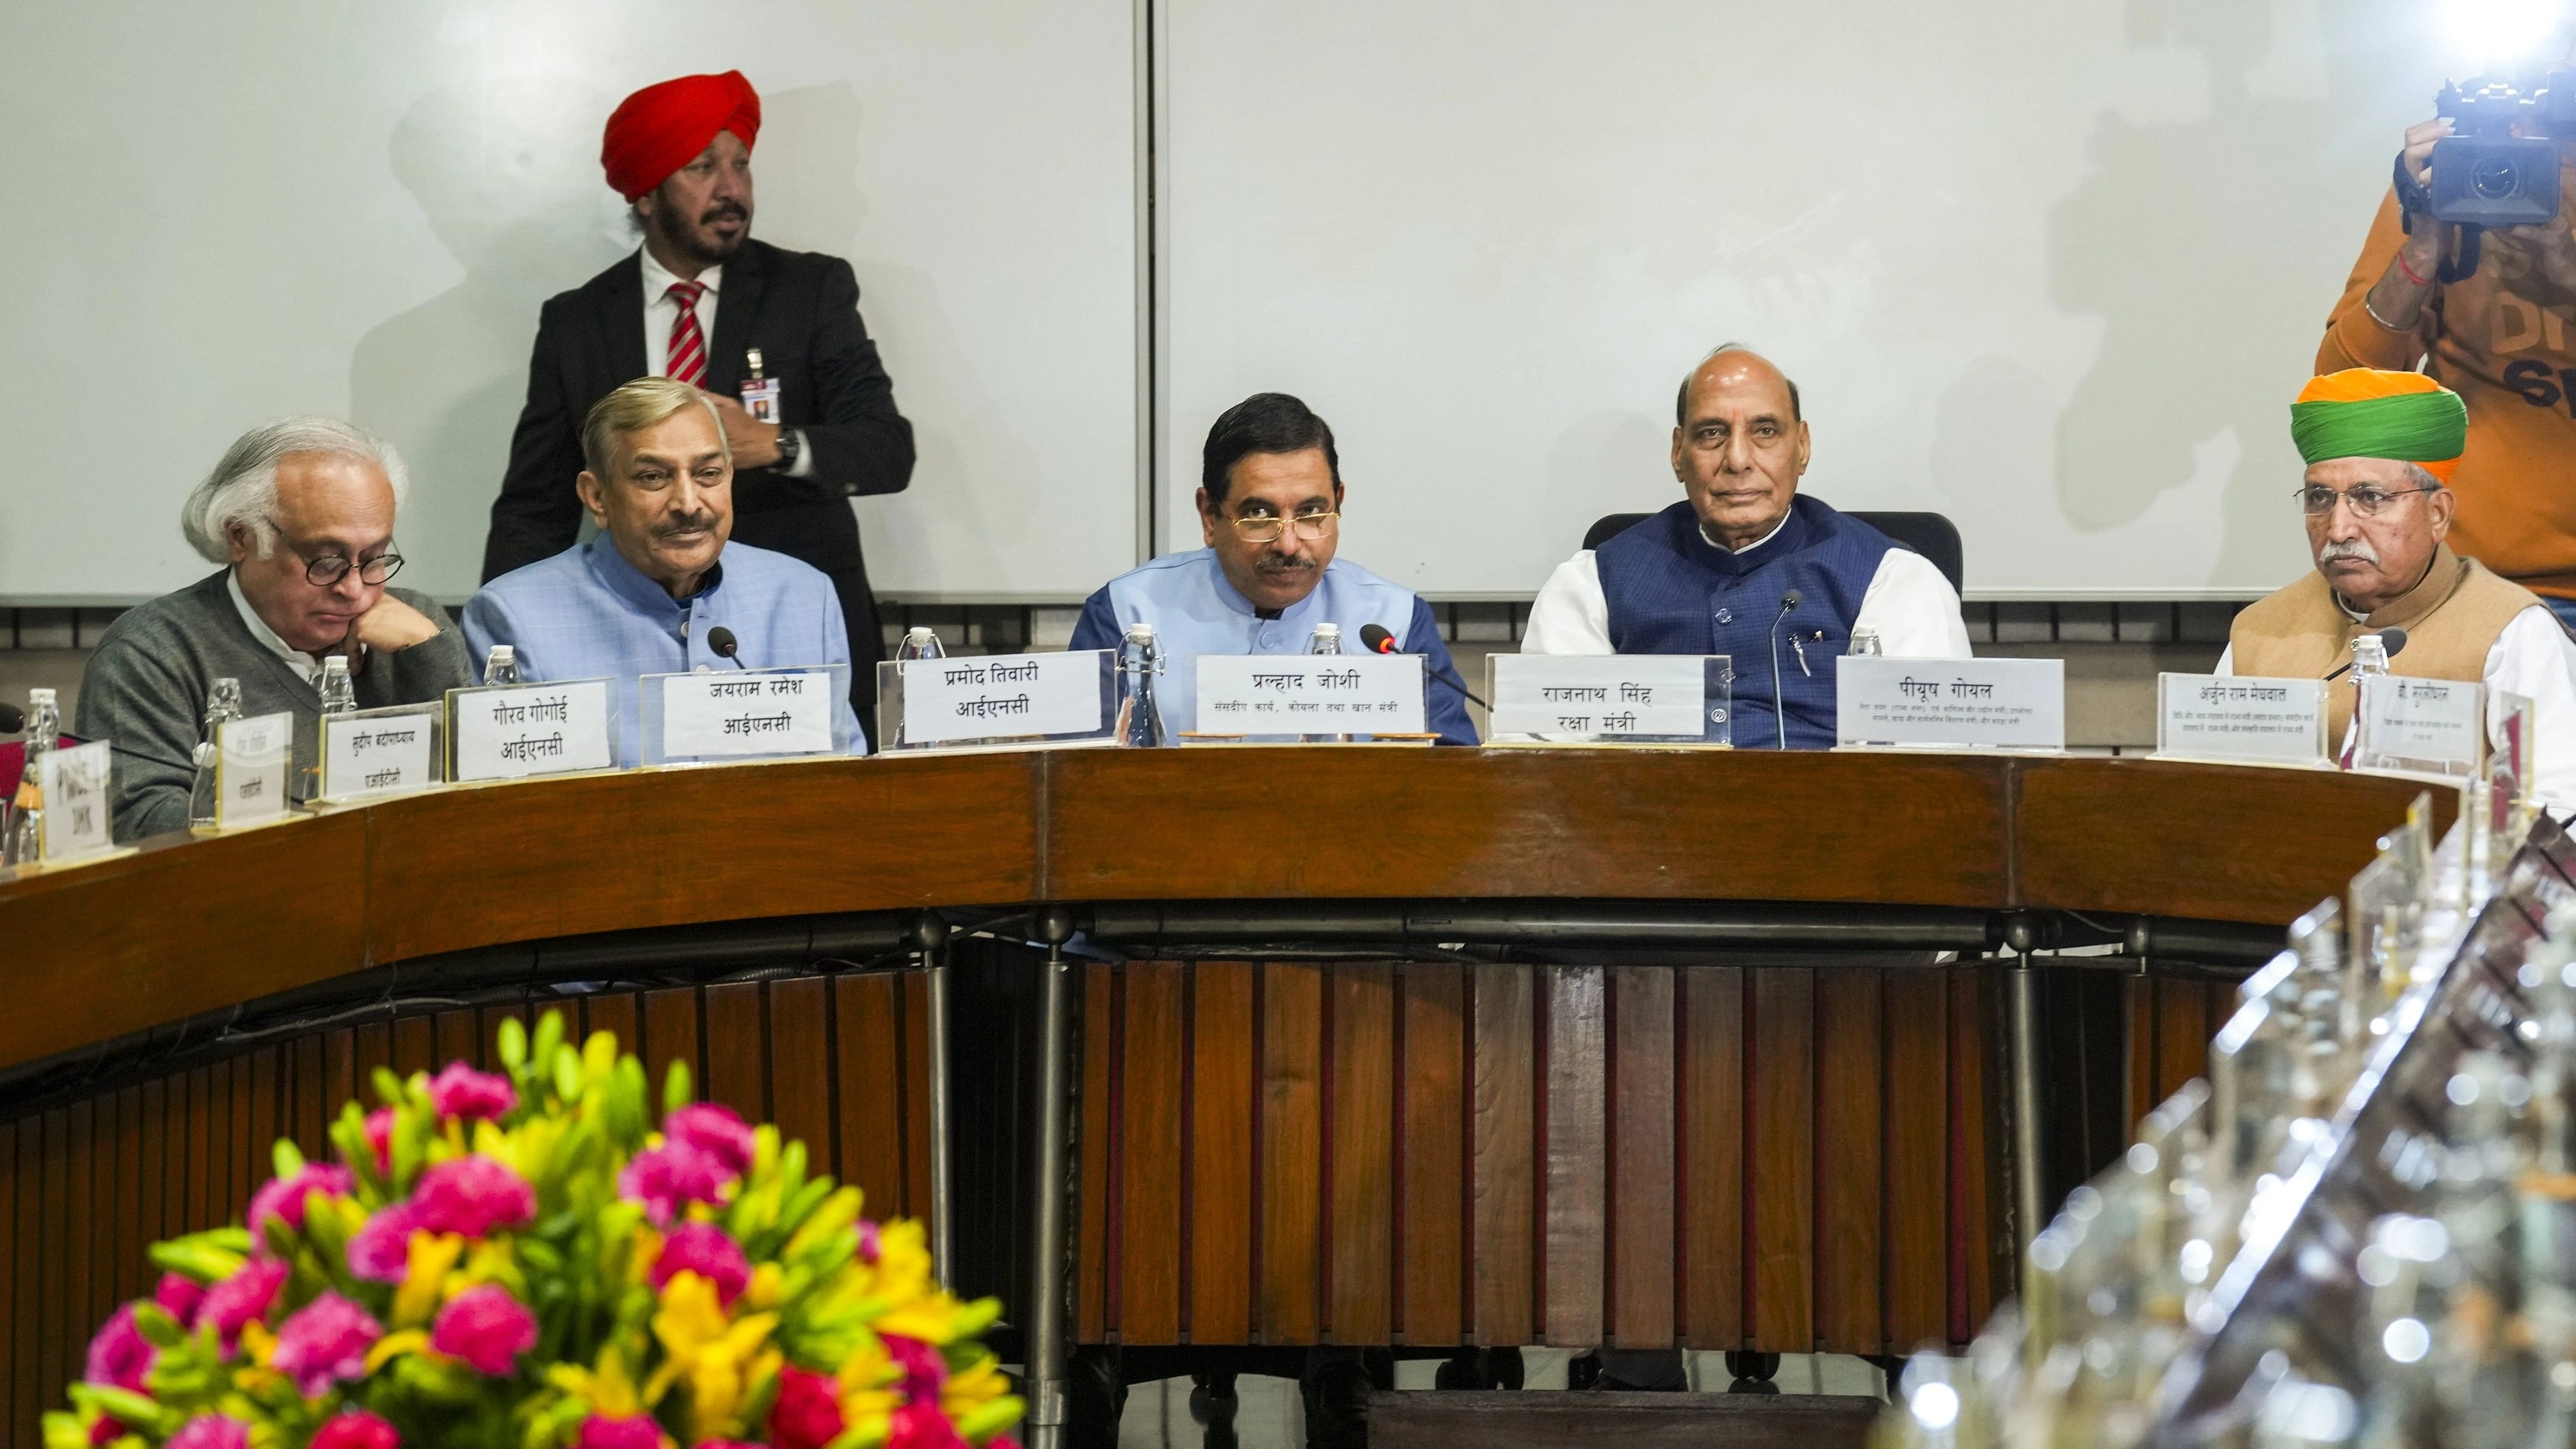 <div class="paragraphs"><p>New Delhi: Union Defence Minister Rajnath Singh, Union Minister of State for Law and Justice, Parliamentary Affairs and Culture Arjun Ram Meghwal, Union Minister of Parliamentary Affairs, Coal and Mines Pralhad Joshi, Congress MPs Jairam Ramesh and Pramod Tiwari and others during a meeting of the Minister of Parliamentary Affairs with floor leaders of political parties at the Parliament House before the commencement of the Winter Session, in New Delhi.</p></div>